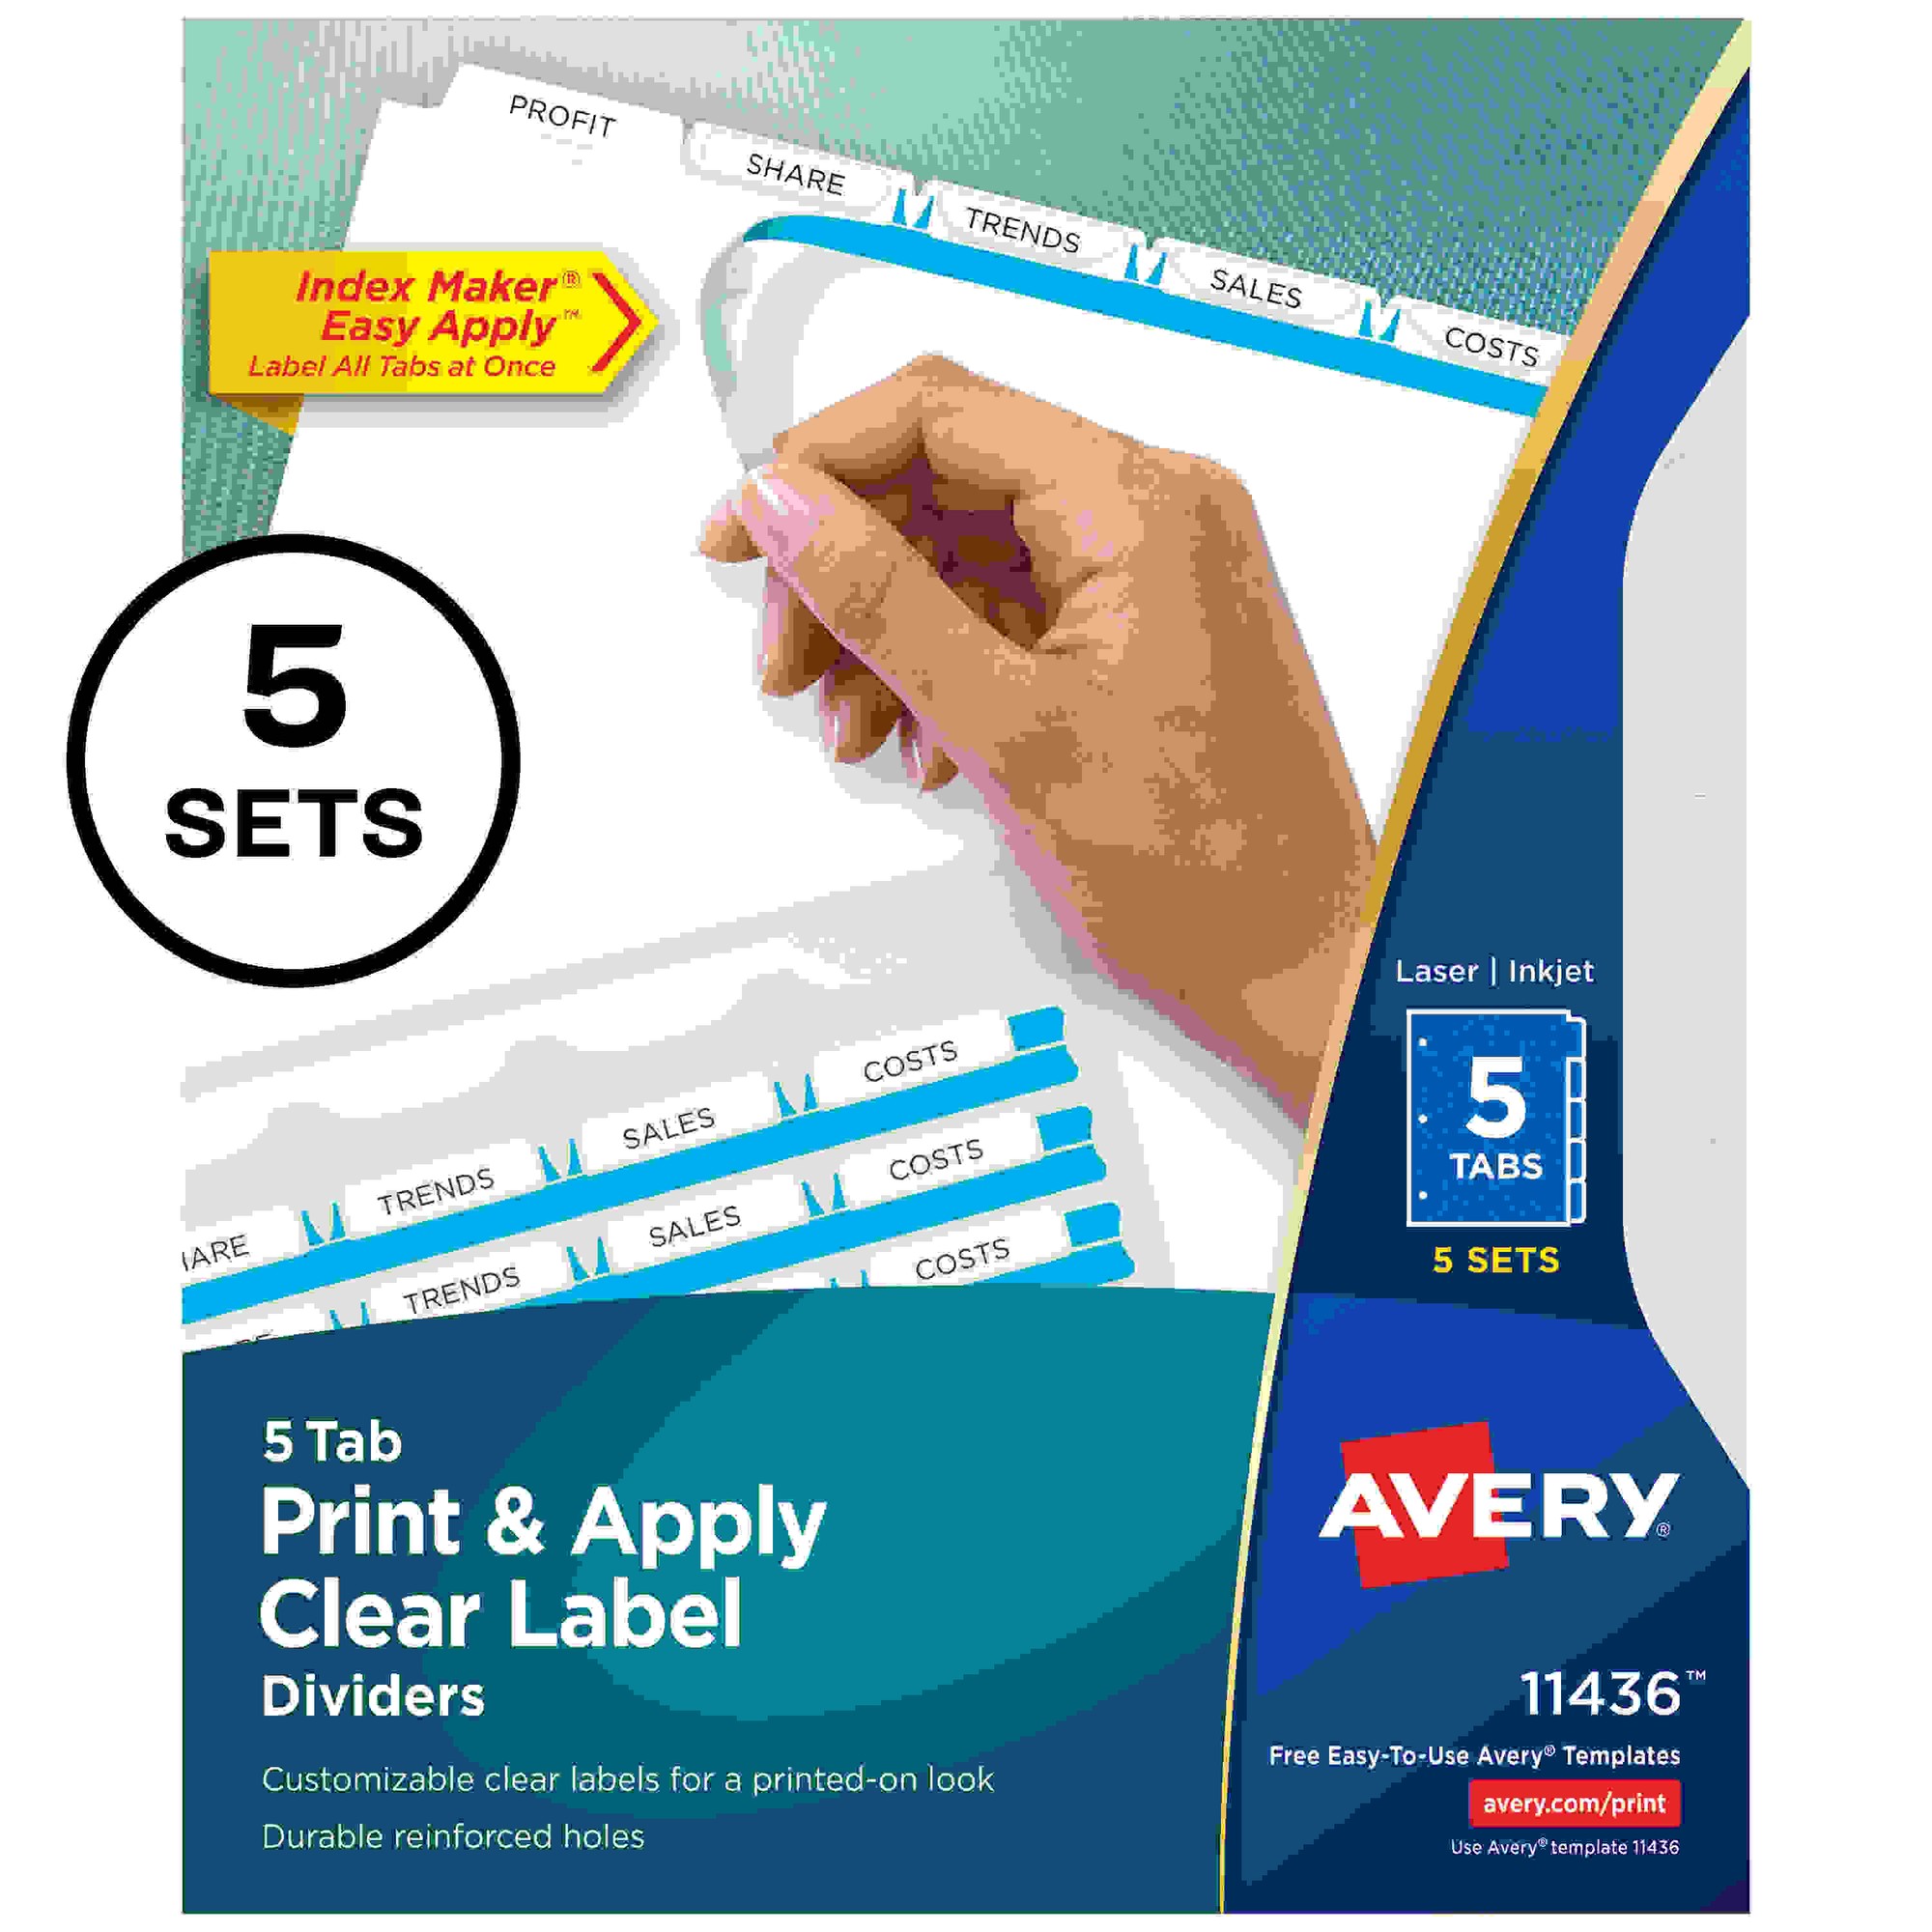 Avery Print & Apply Clear Label Dividers - Index Maker Easy Apply Label Strip - 25 x Divider(s) - 5 Tab(s)/Set - 8.5" Divid